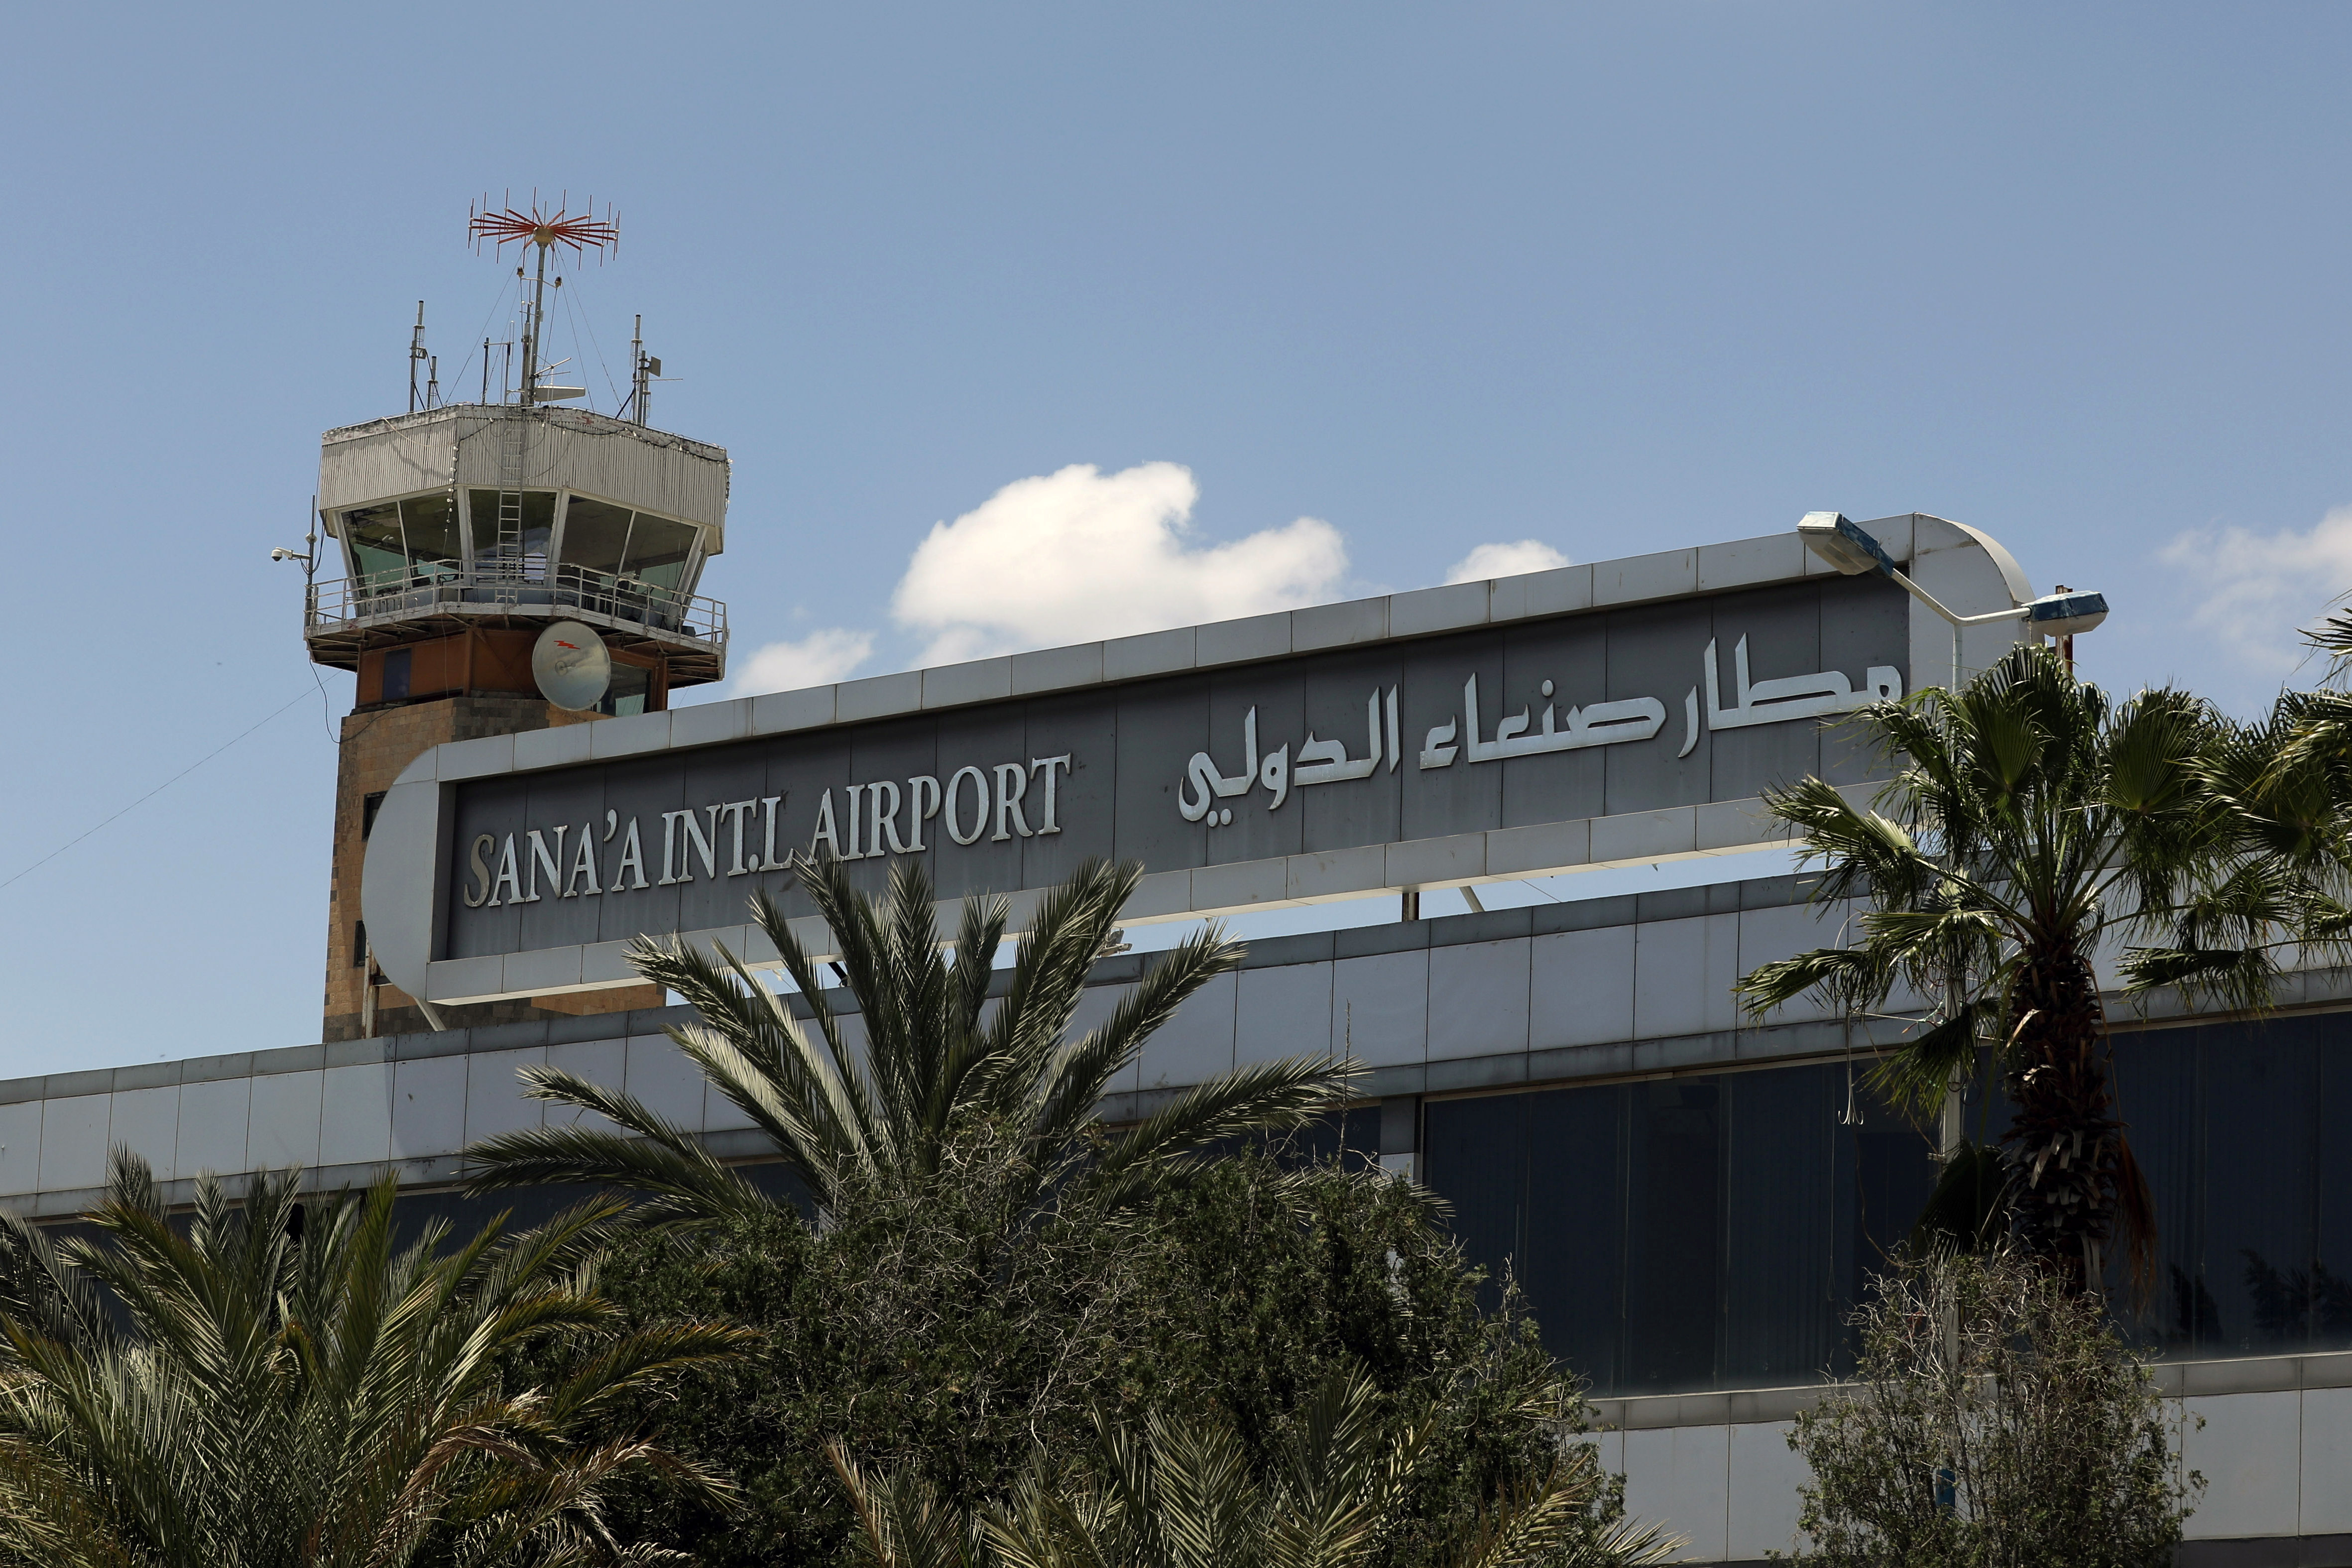 A view shows the tower of Sanaa airport in Sanaa